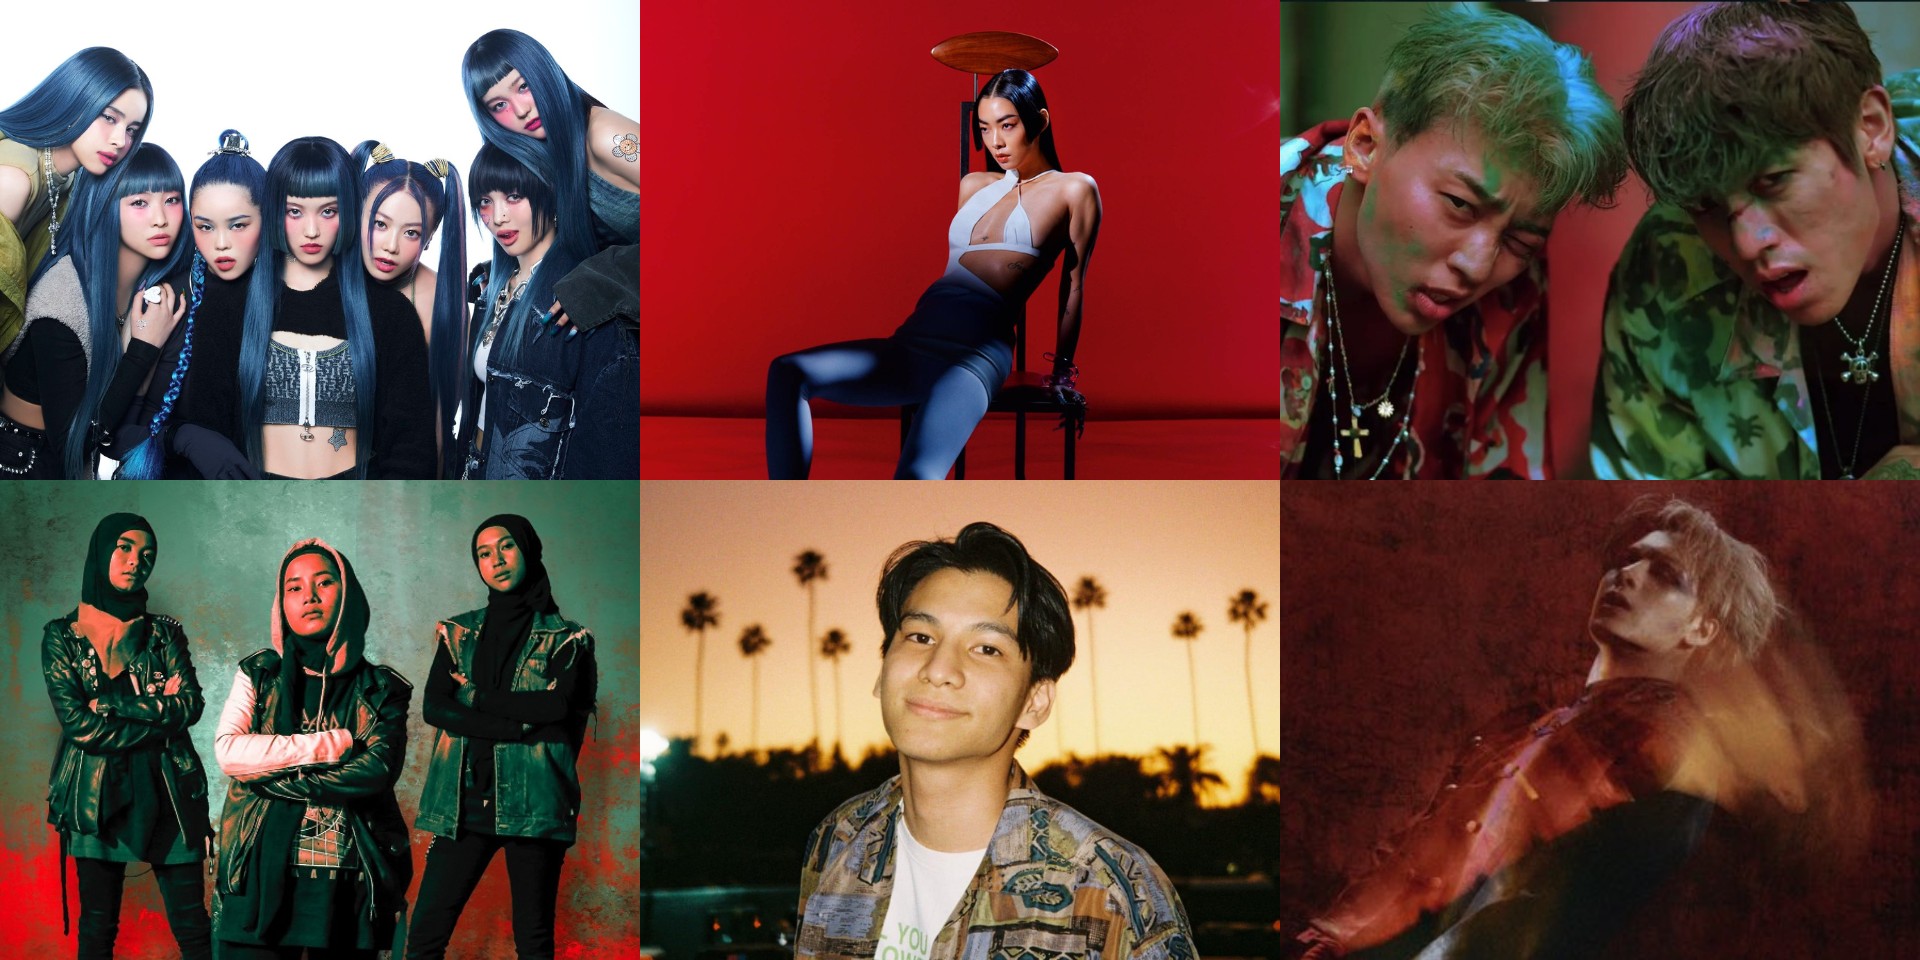 Head in the Clouds LA announces 5th anniversary lineup – DPR IAN + DPR LIVE, Jackson Wang, Rina Sawayama, XG, Phum Viphurit, Voice of Baceprot, and more